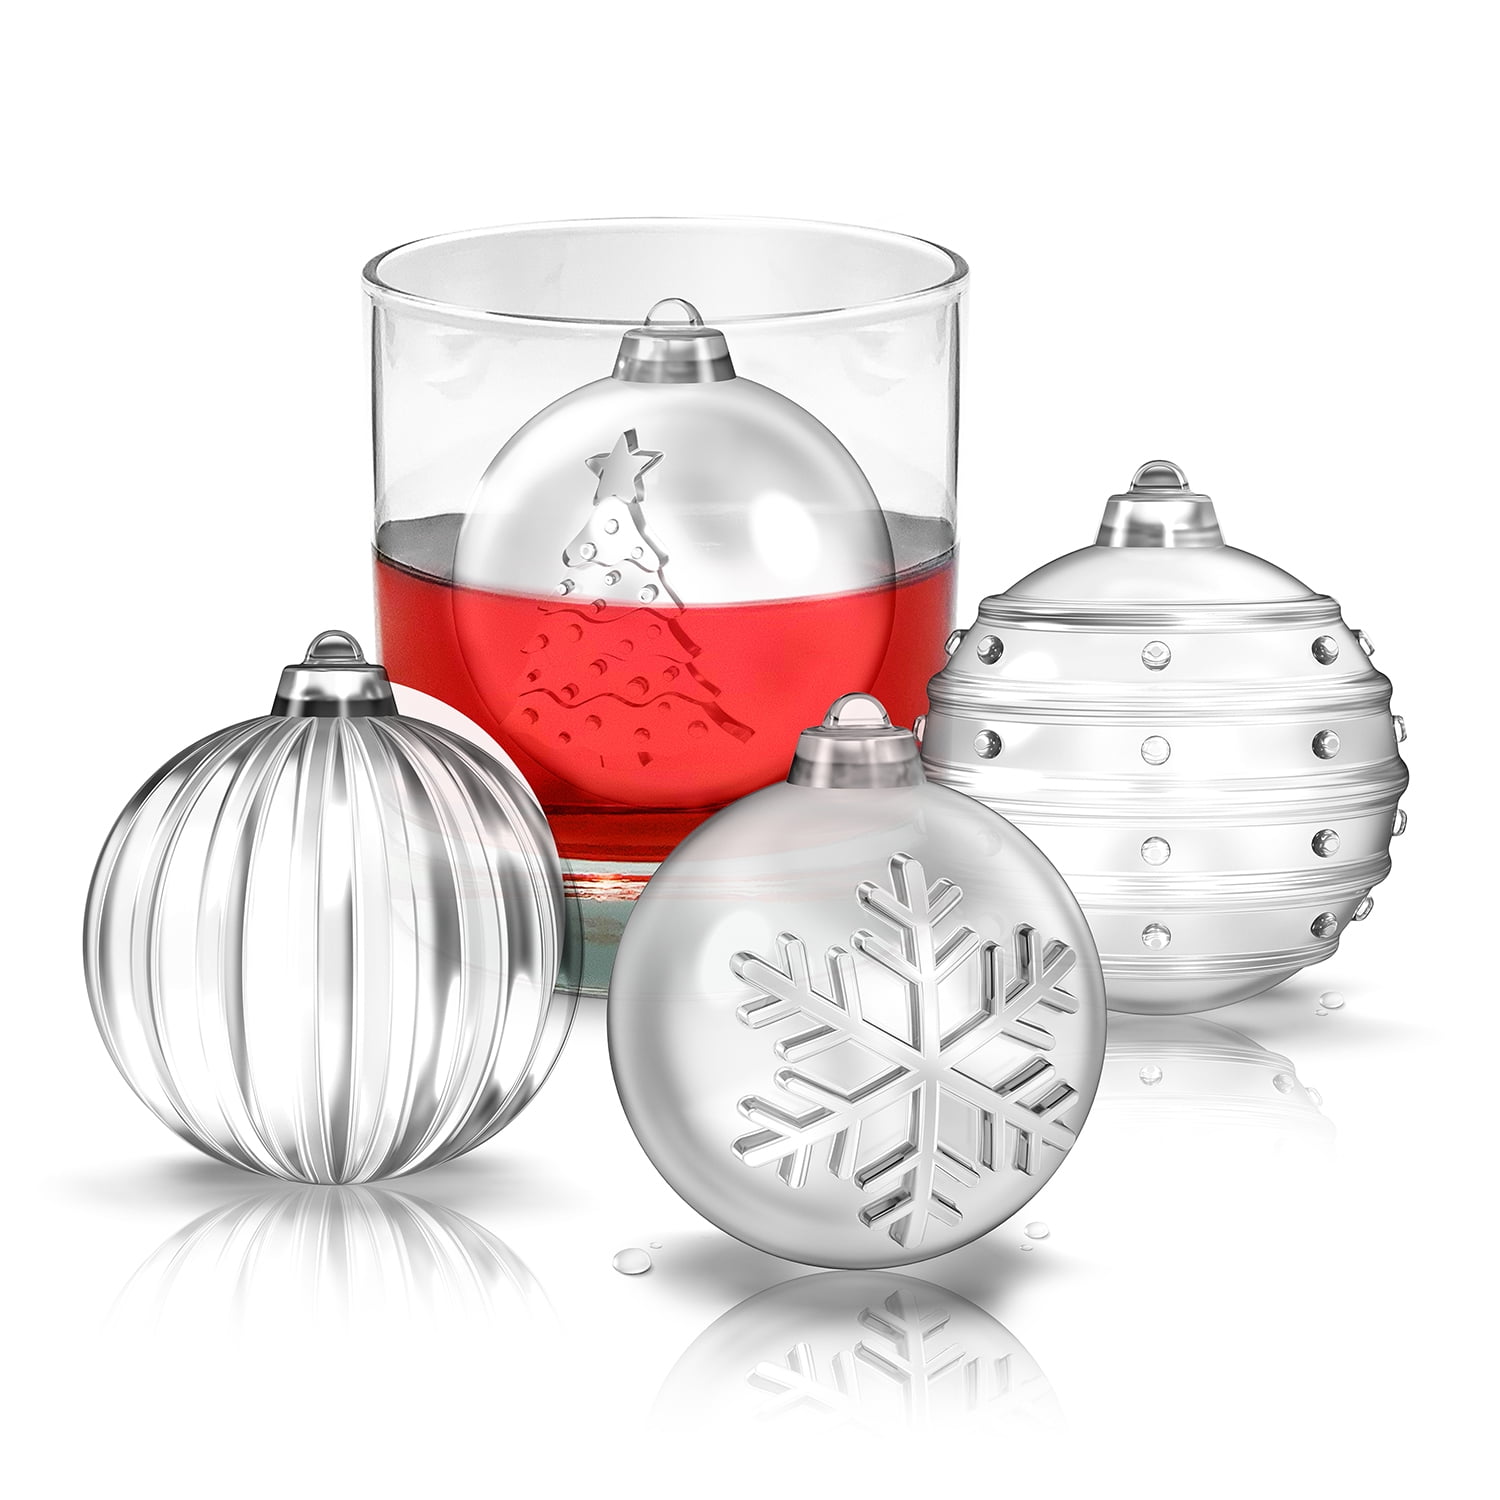 Tovolo Silicone Ice Mold Set, Christmas Ornament Sphere Large Ice